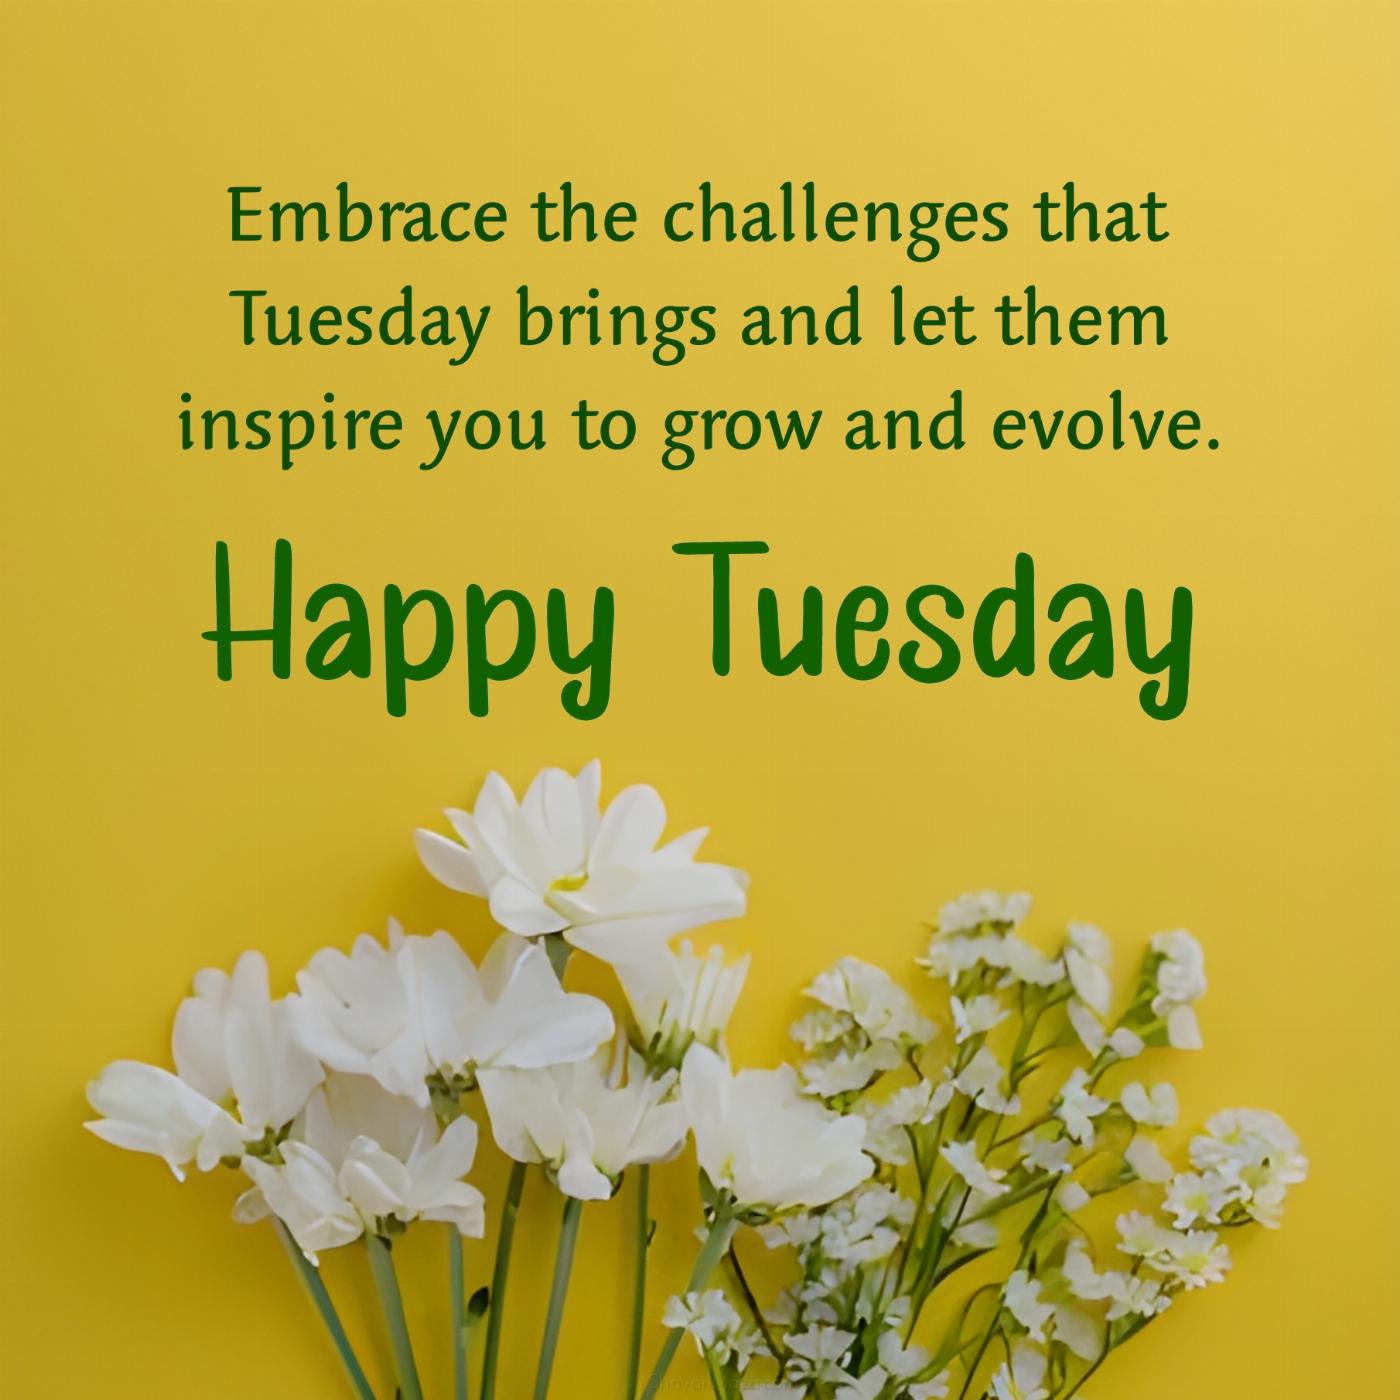 Embrace the challenges that Tuesday brings and let them inspire